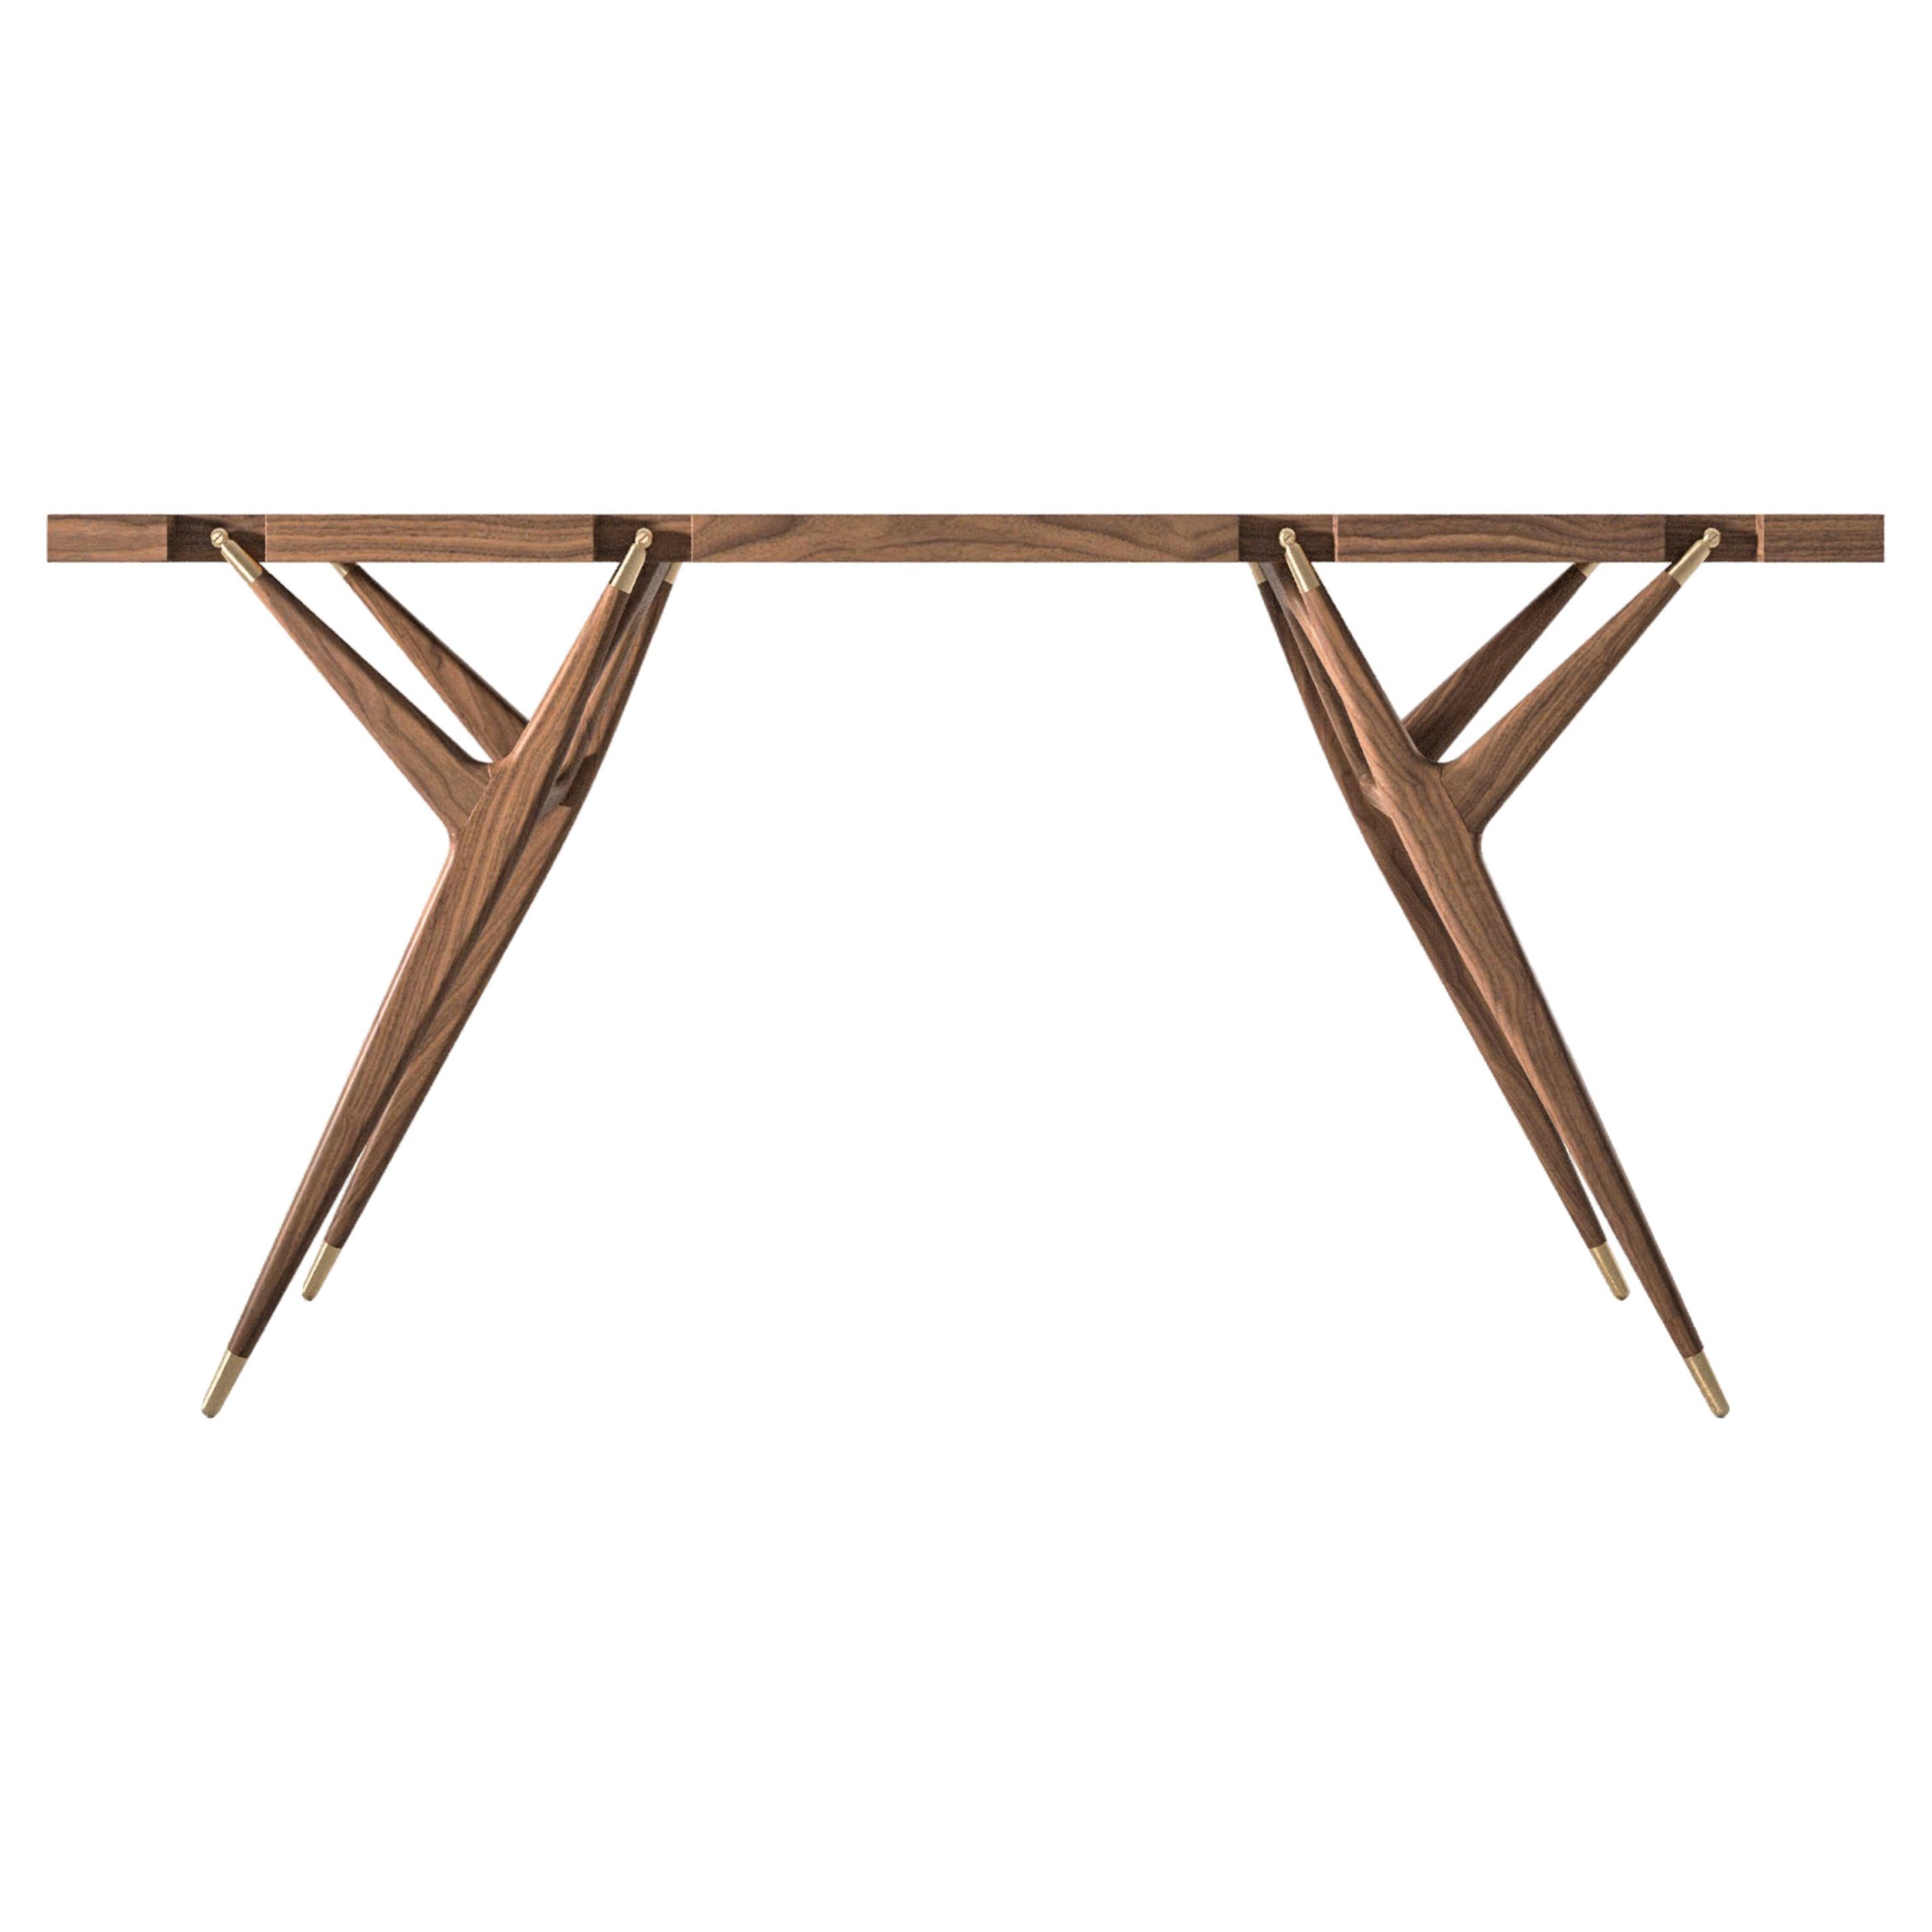 Ico Parisi PA' 1947 Wooden Console Table for Cassina, new